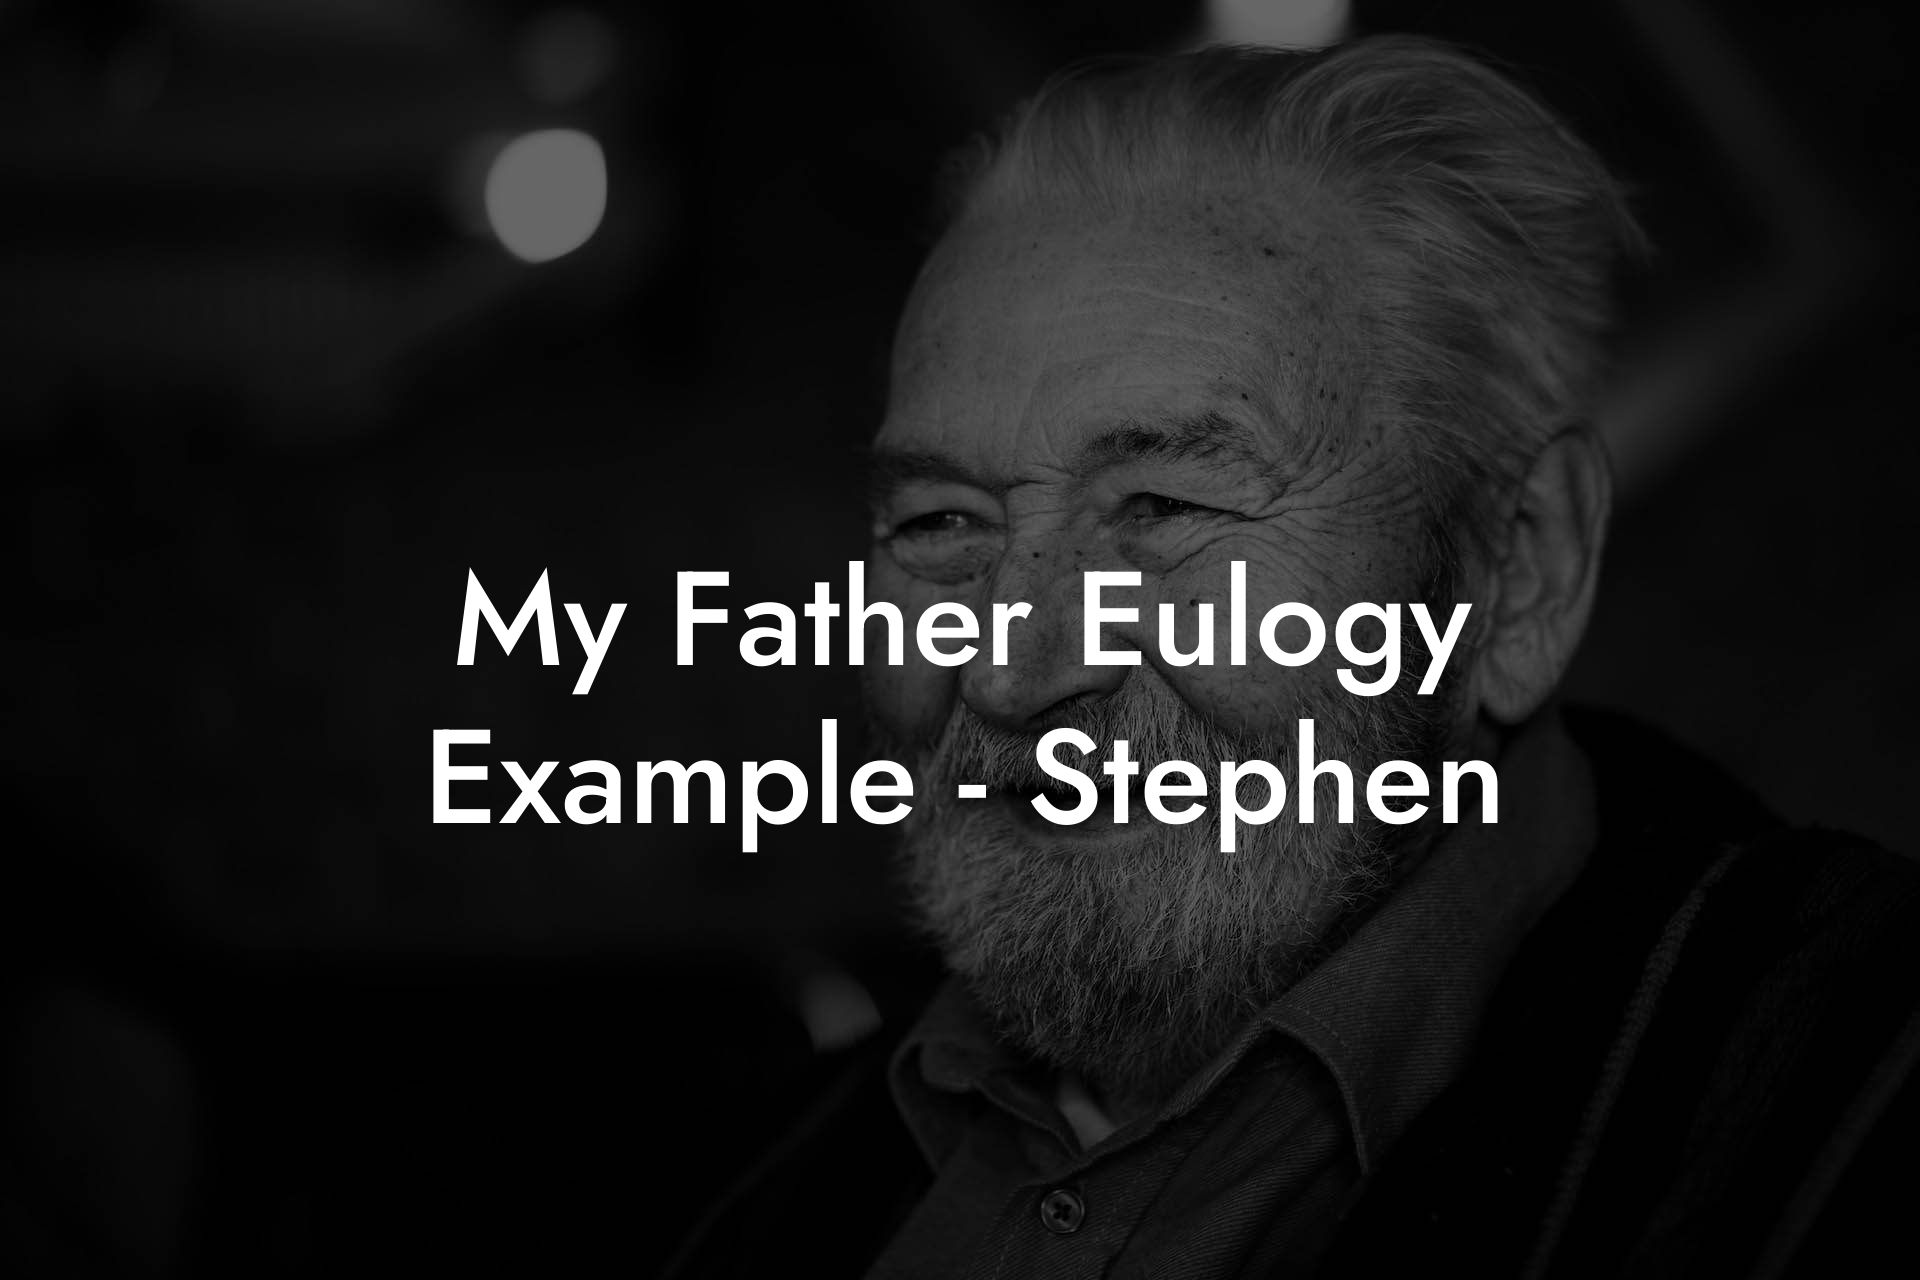 My Father Eulogy Example - Stephen